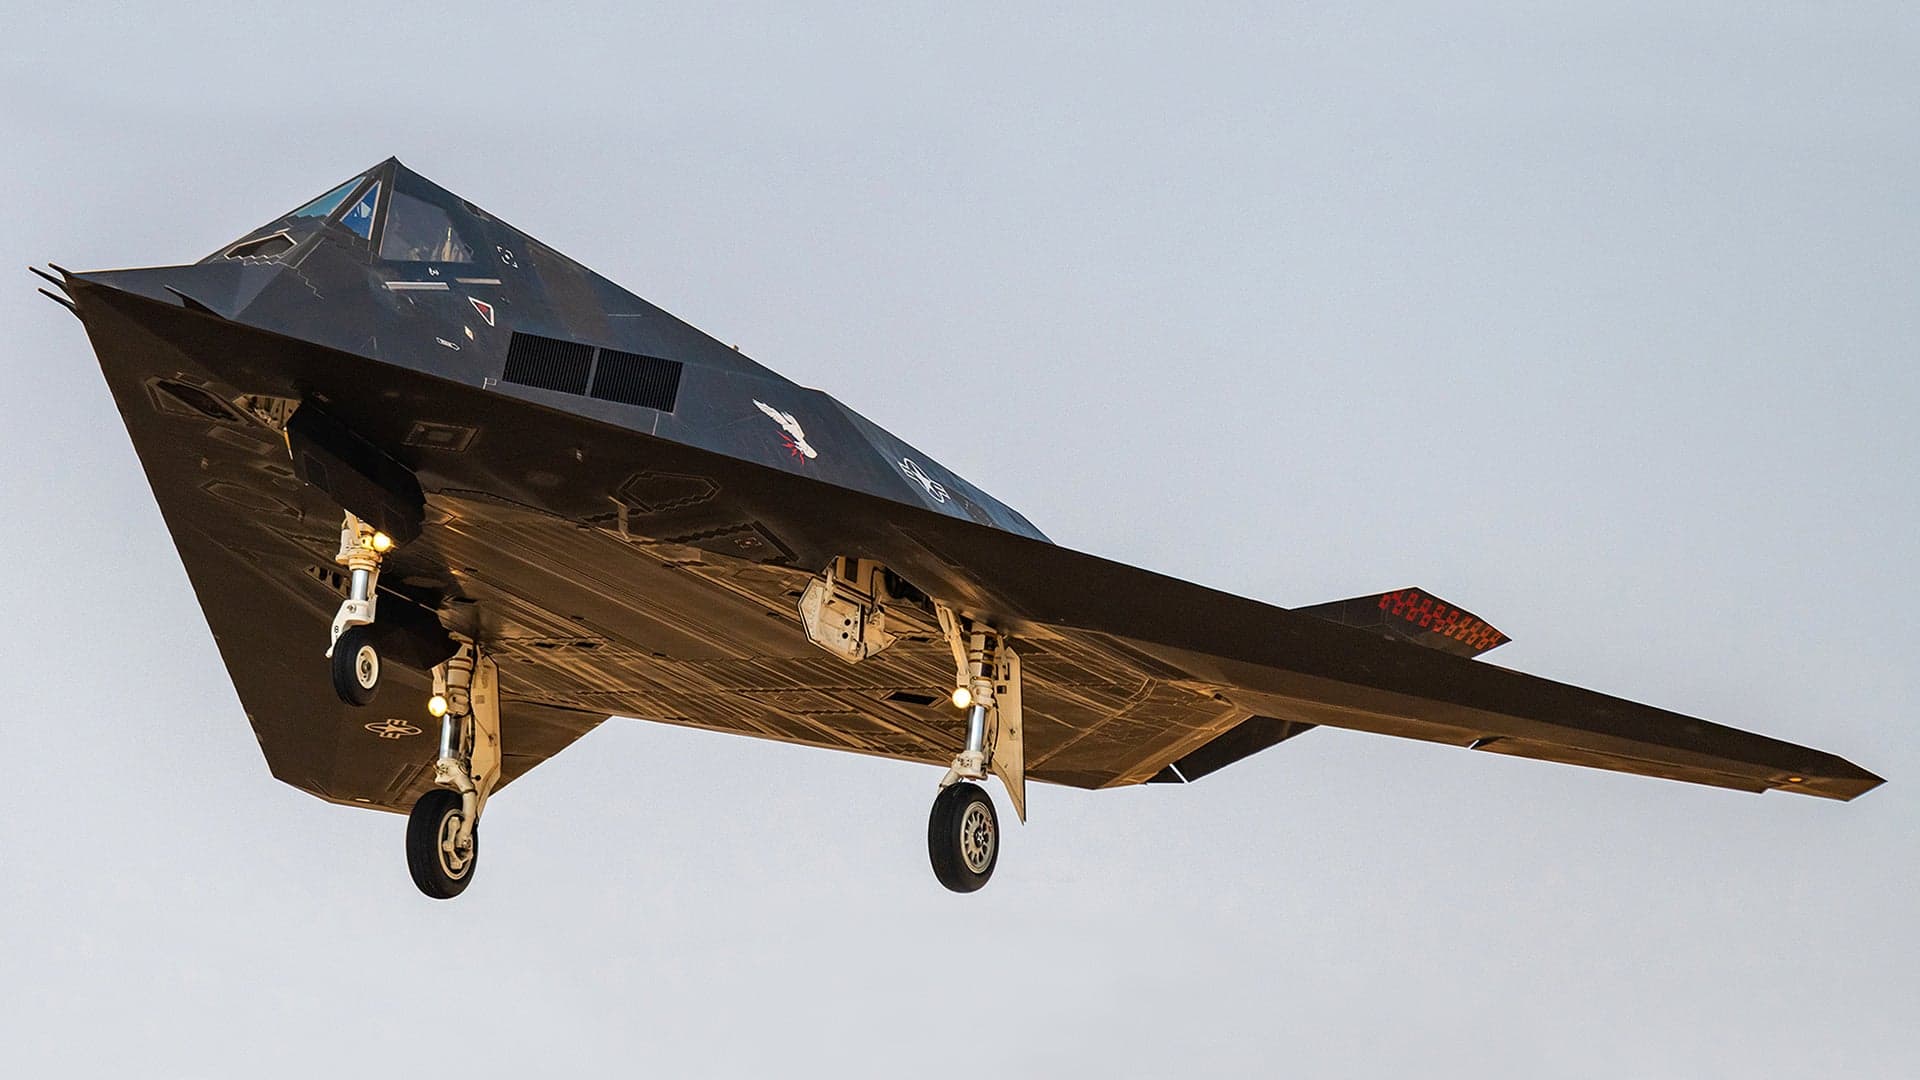 Stealthy F-117 Nighthawks Have Been Masquerading As Cruise Missiles